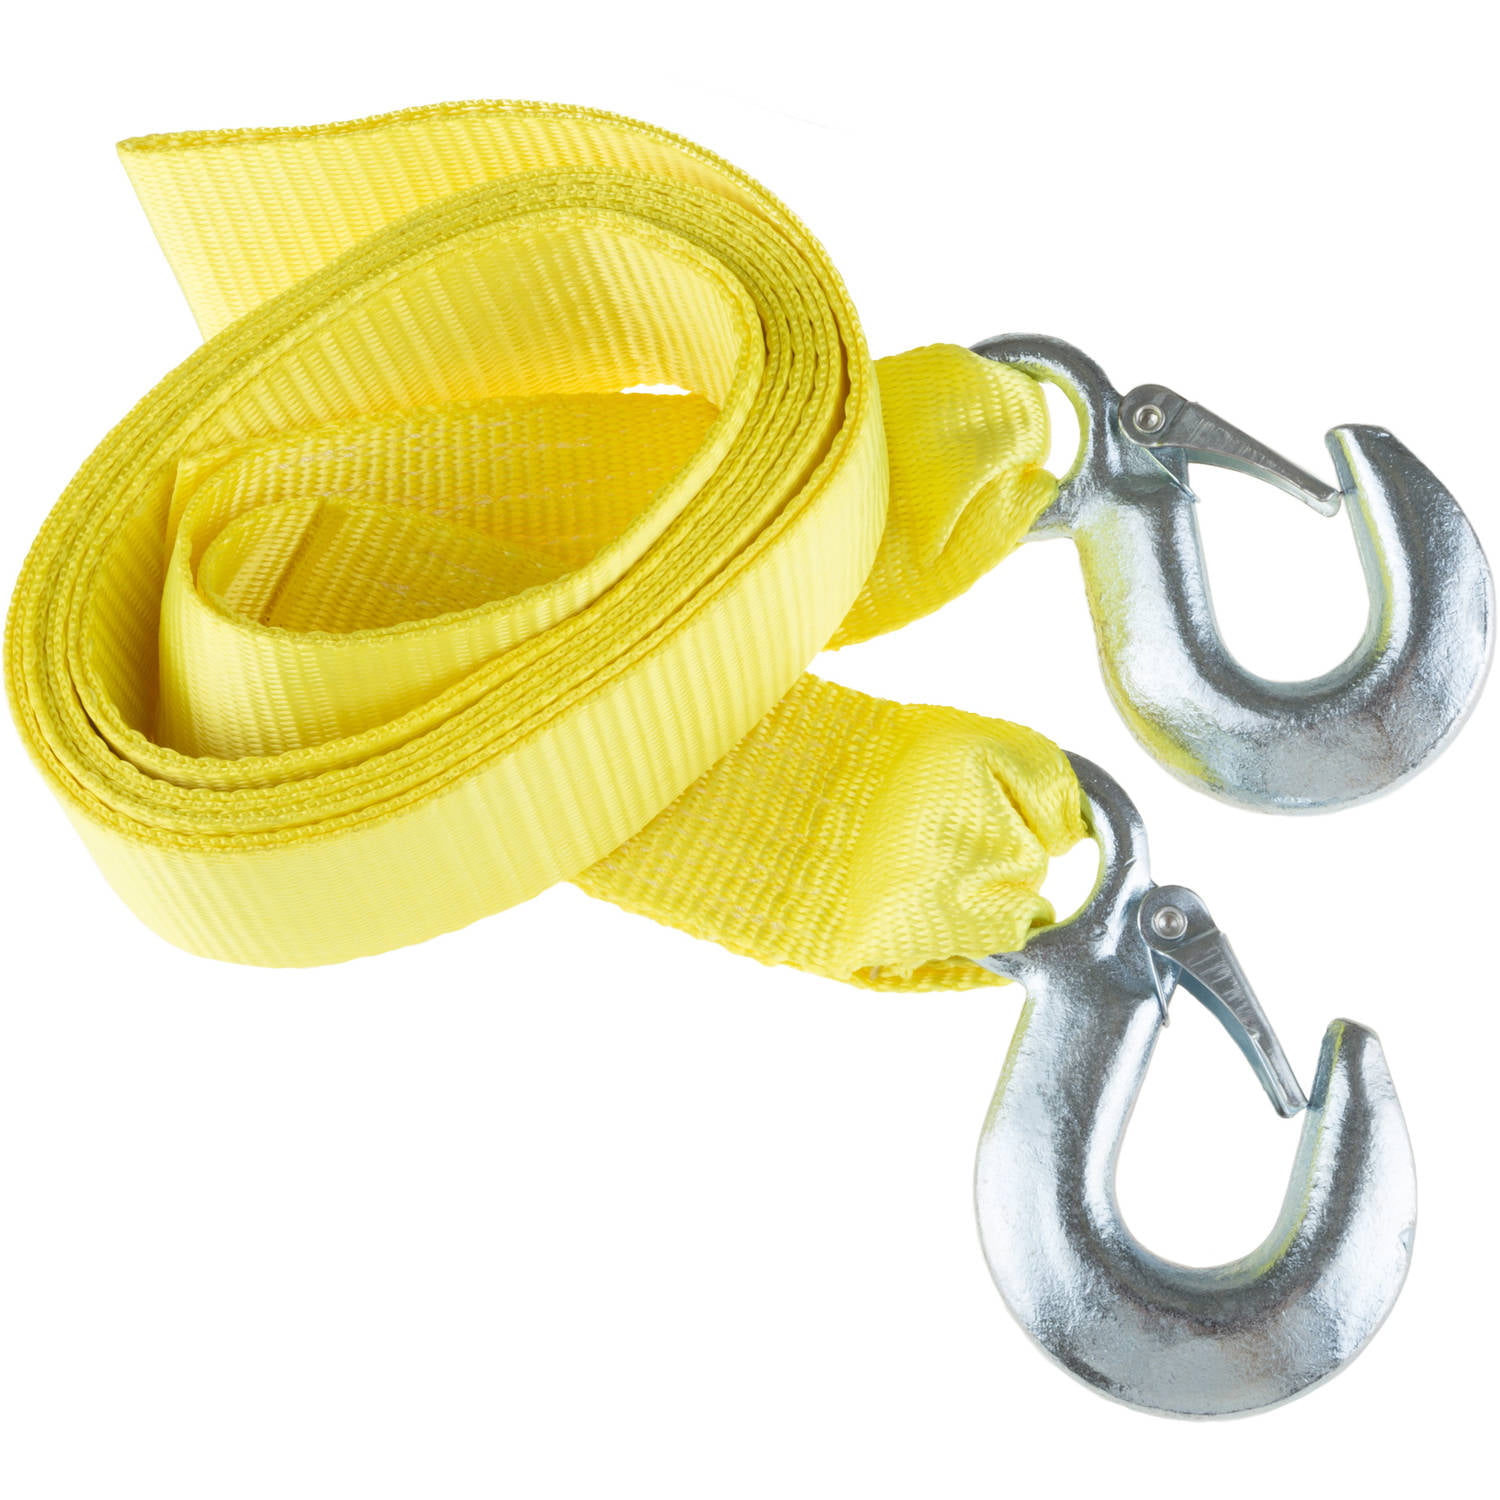 2" x 12 Feet Fluorescent Nylon Web Tow Strap Rope 2 Hooks 6,000 lbs Towing Strap 